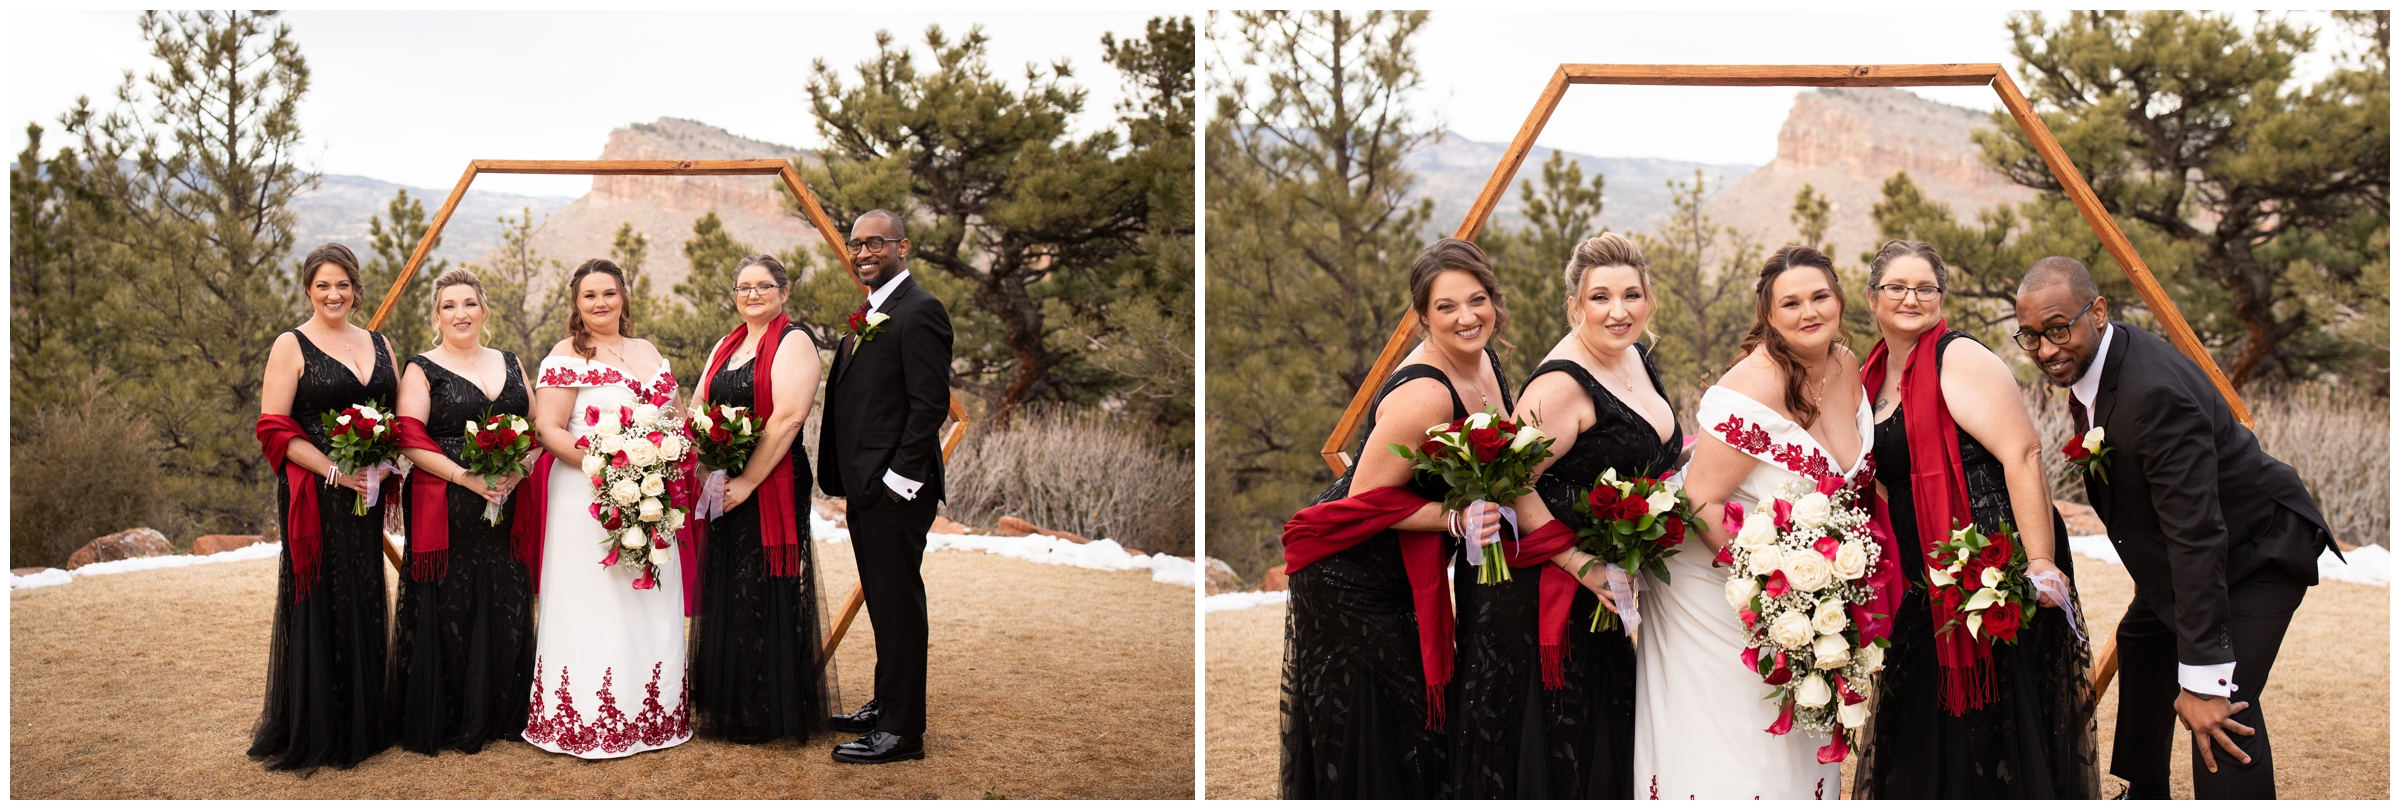 bridal party in black and red at Colorado winter wedding 